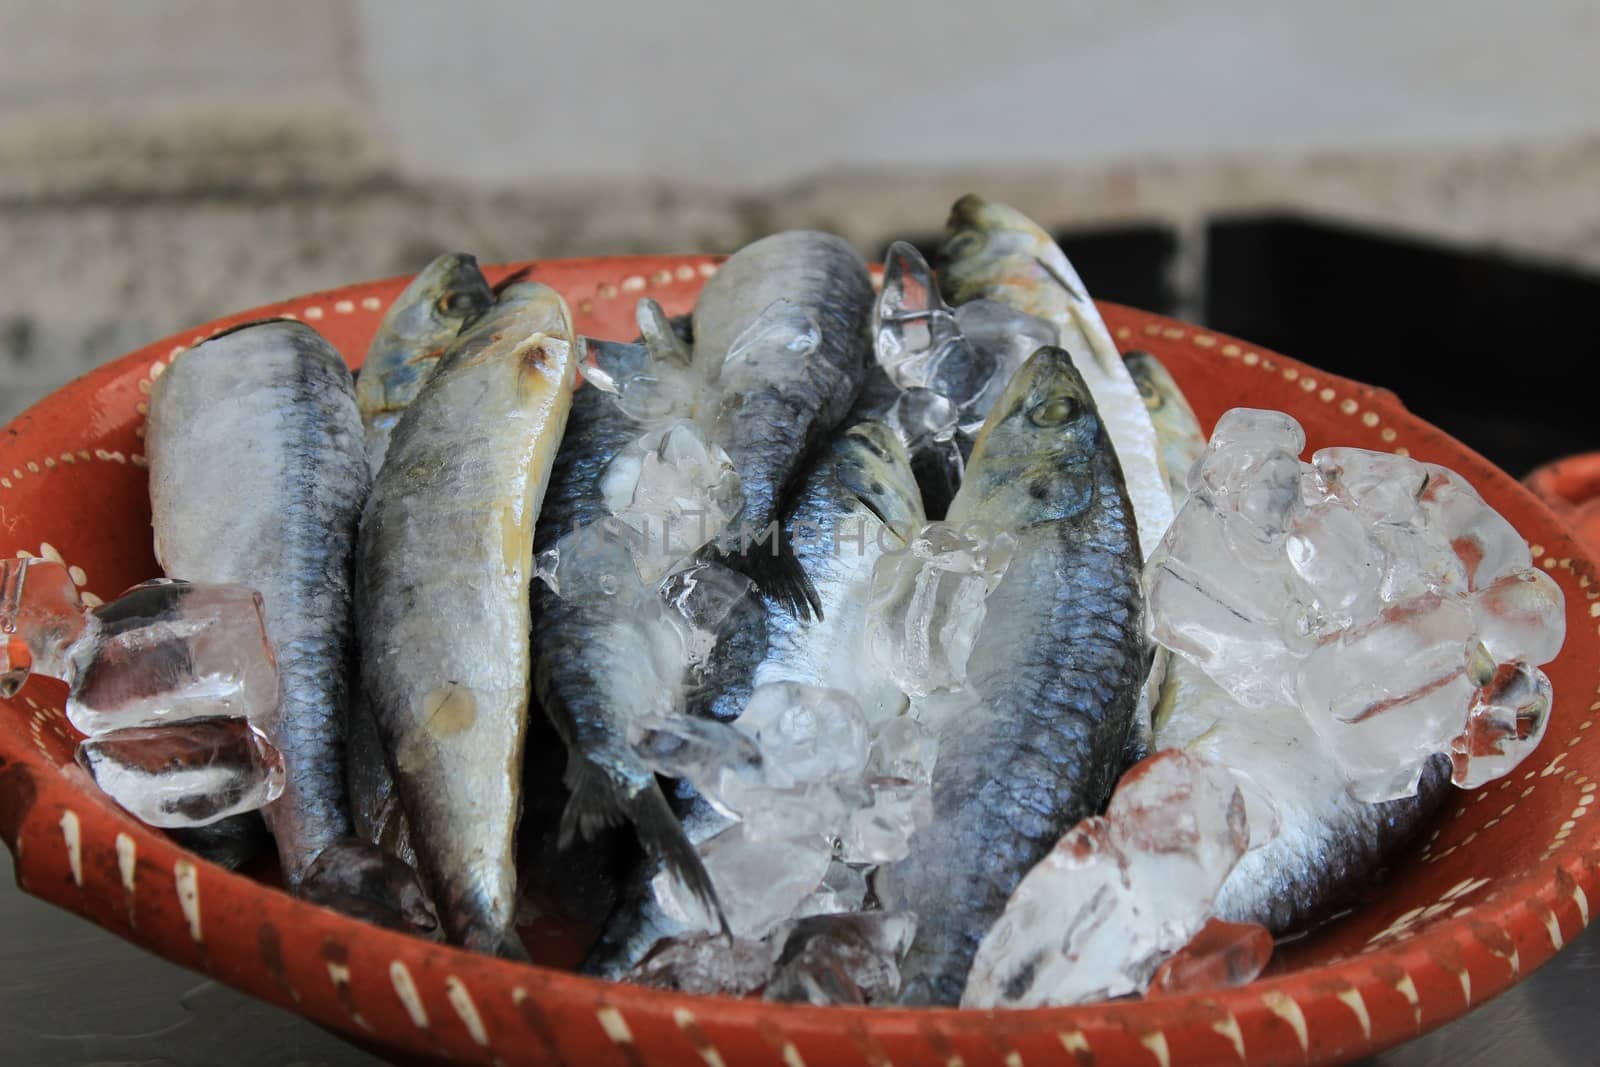 Sardines with ice on plate waiting to be prepared in a market stall in Lisbon